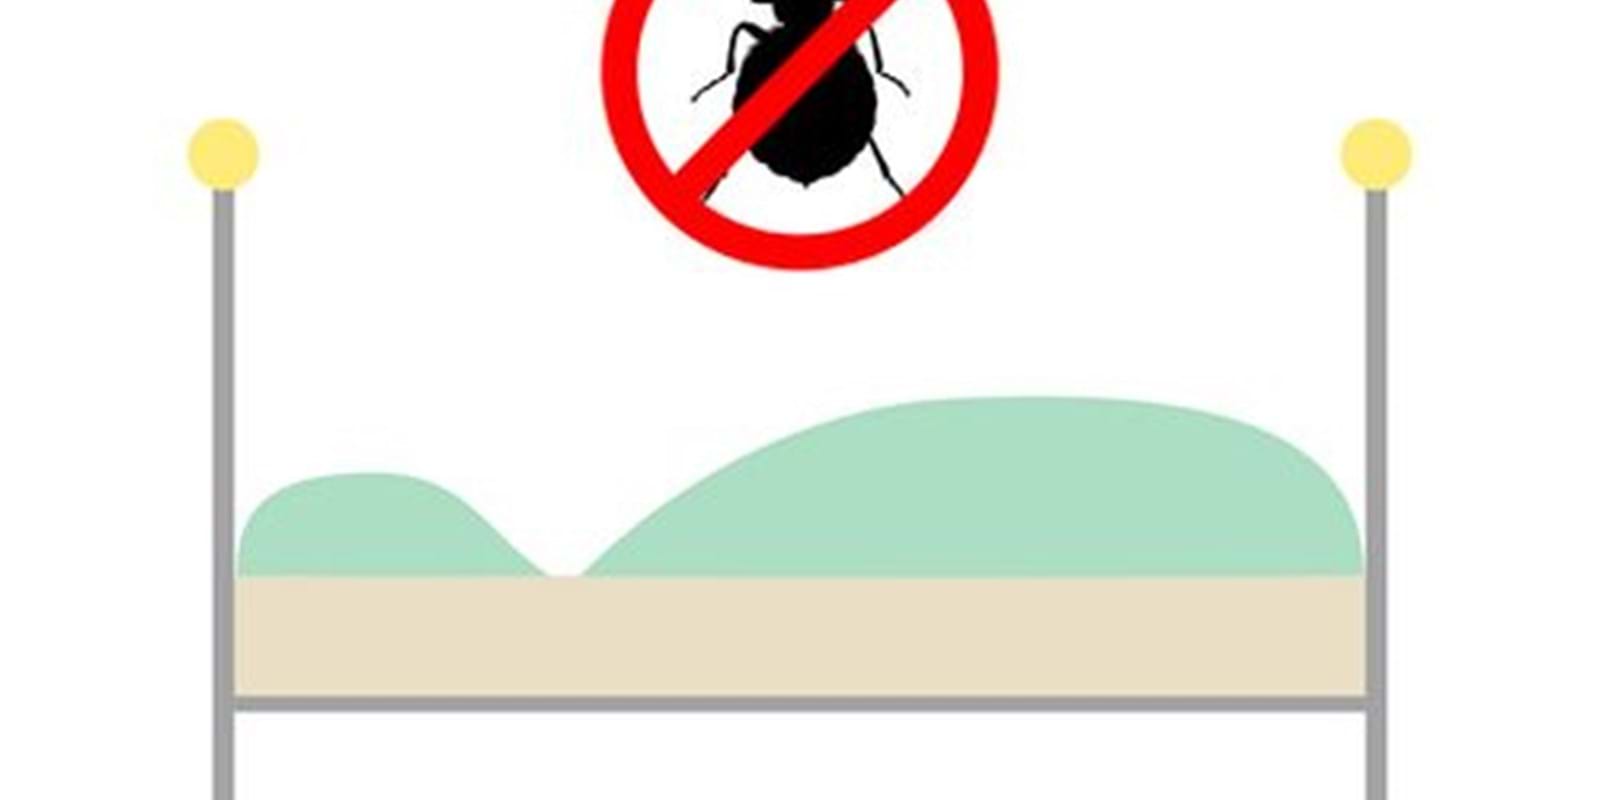 Bed bugs - What are they? (part 1)